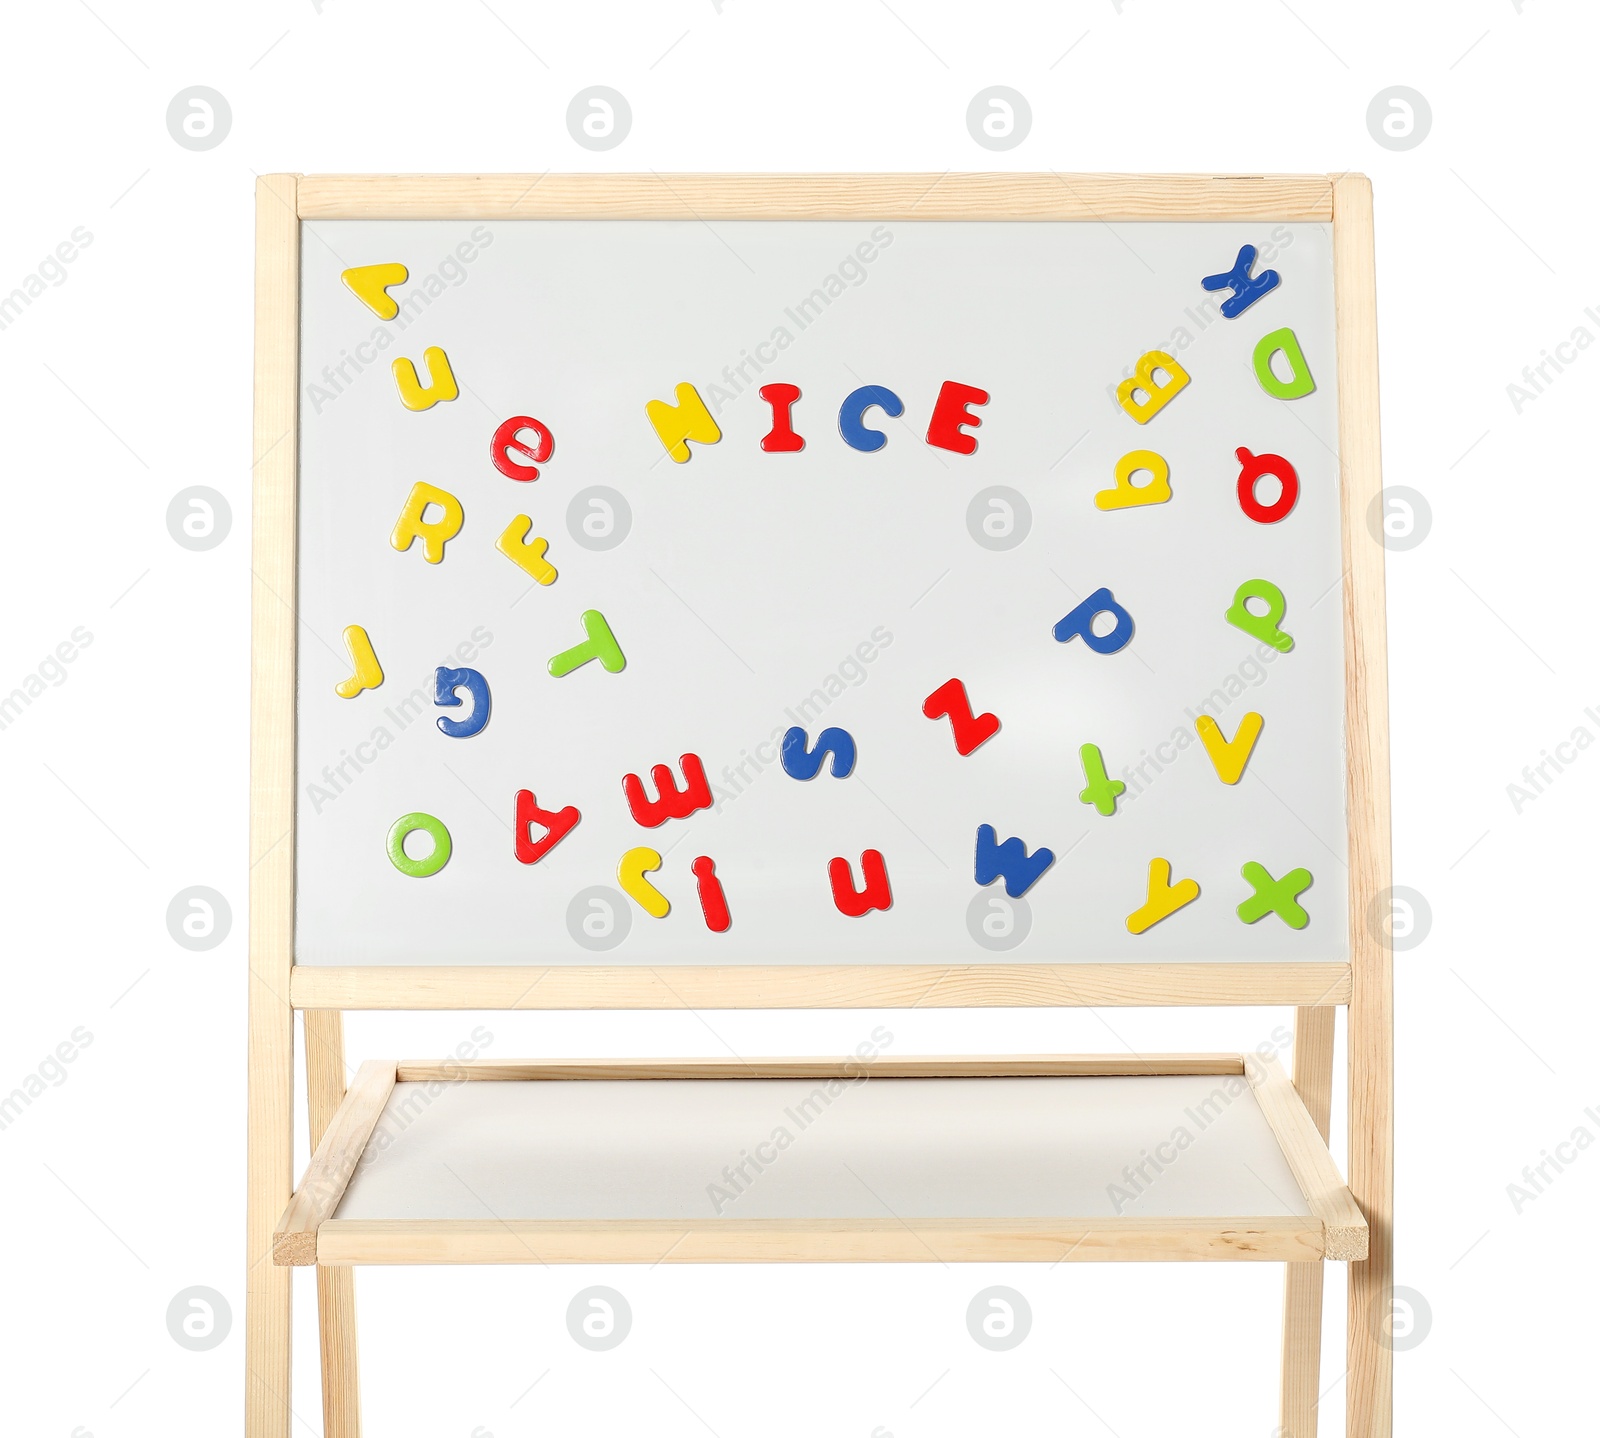 Photo of Word Nice made of magnetic letters on board against white background. Learning alphabet